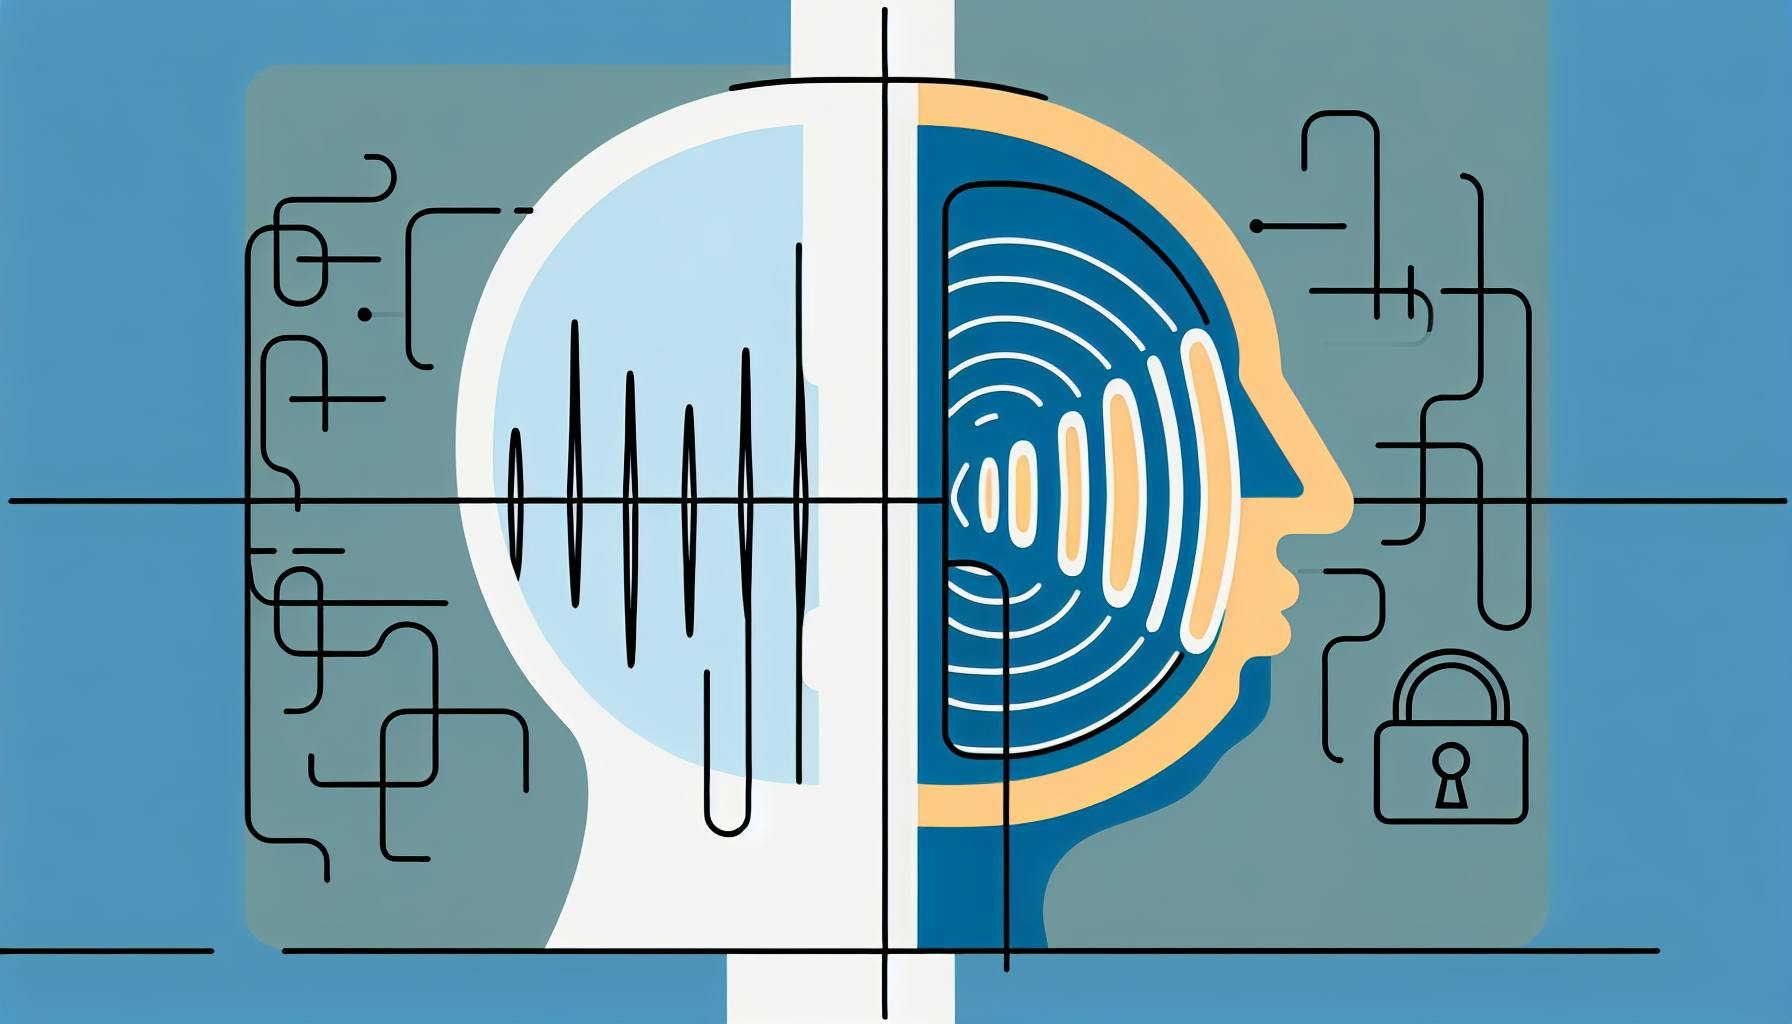 Speech Recognition vs. Voice Recognition: What's the Difference